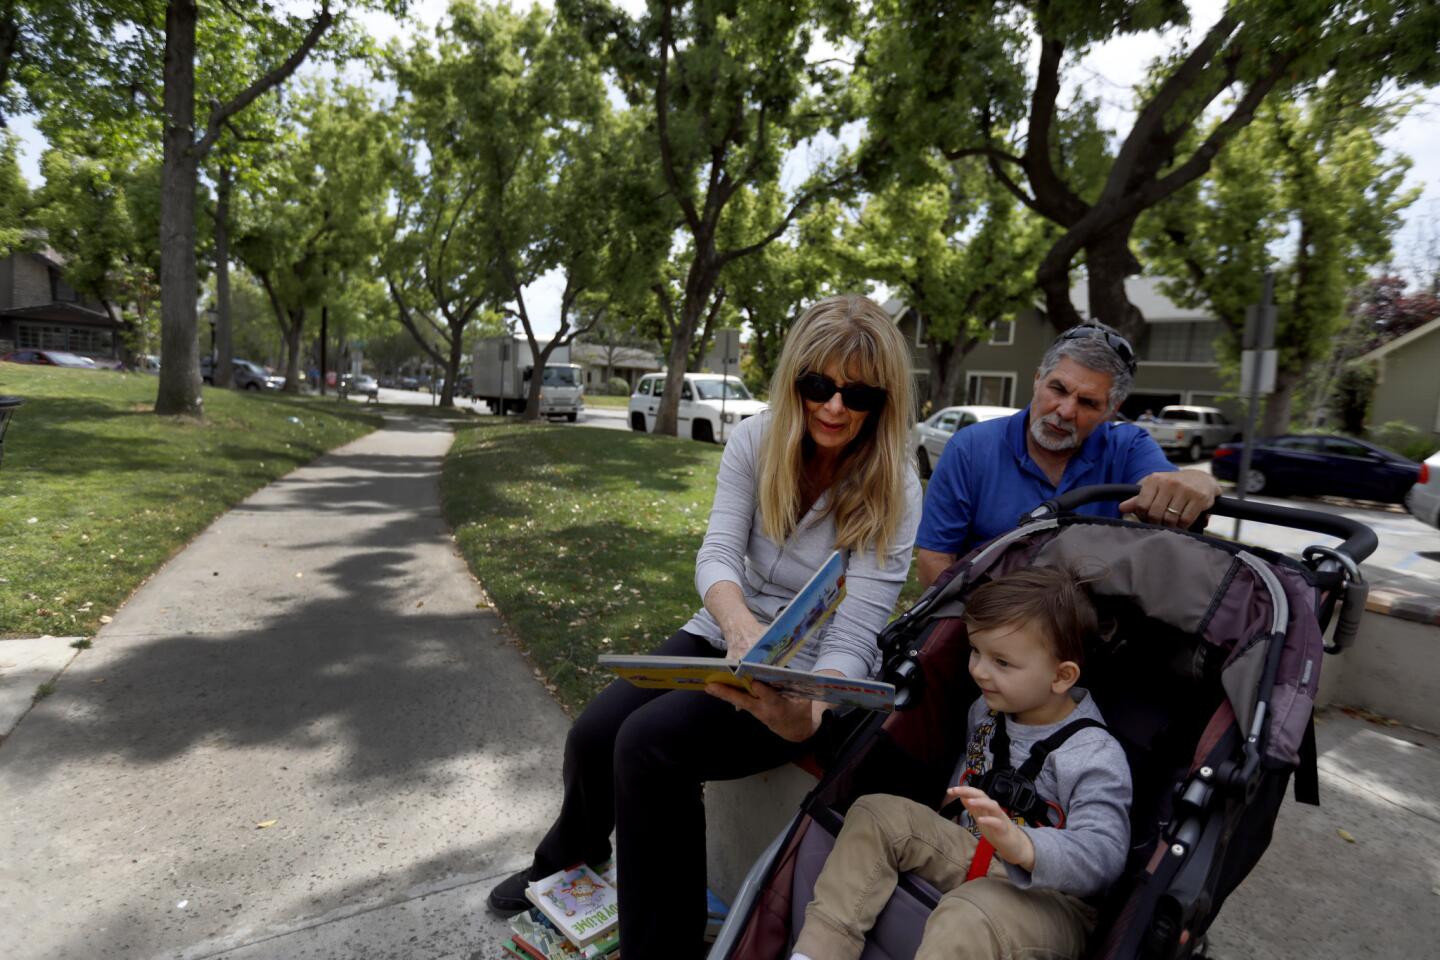 SOUTH PASADENA, CA APRIL 11, 2019: Cindy Ringo and Gary Ringo both of Riverside read to their grandson Jovian Greenhouse, 3, of South Pasadena, as they sit outside South Pasadena Public Library in South Pasadena CA April 11, 2019. (Francine Orr/ Los Angeles Times)